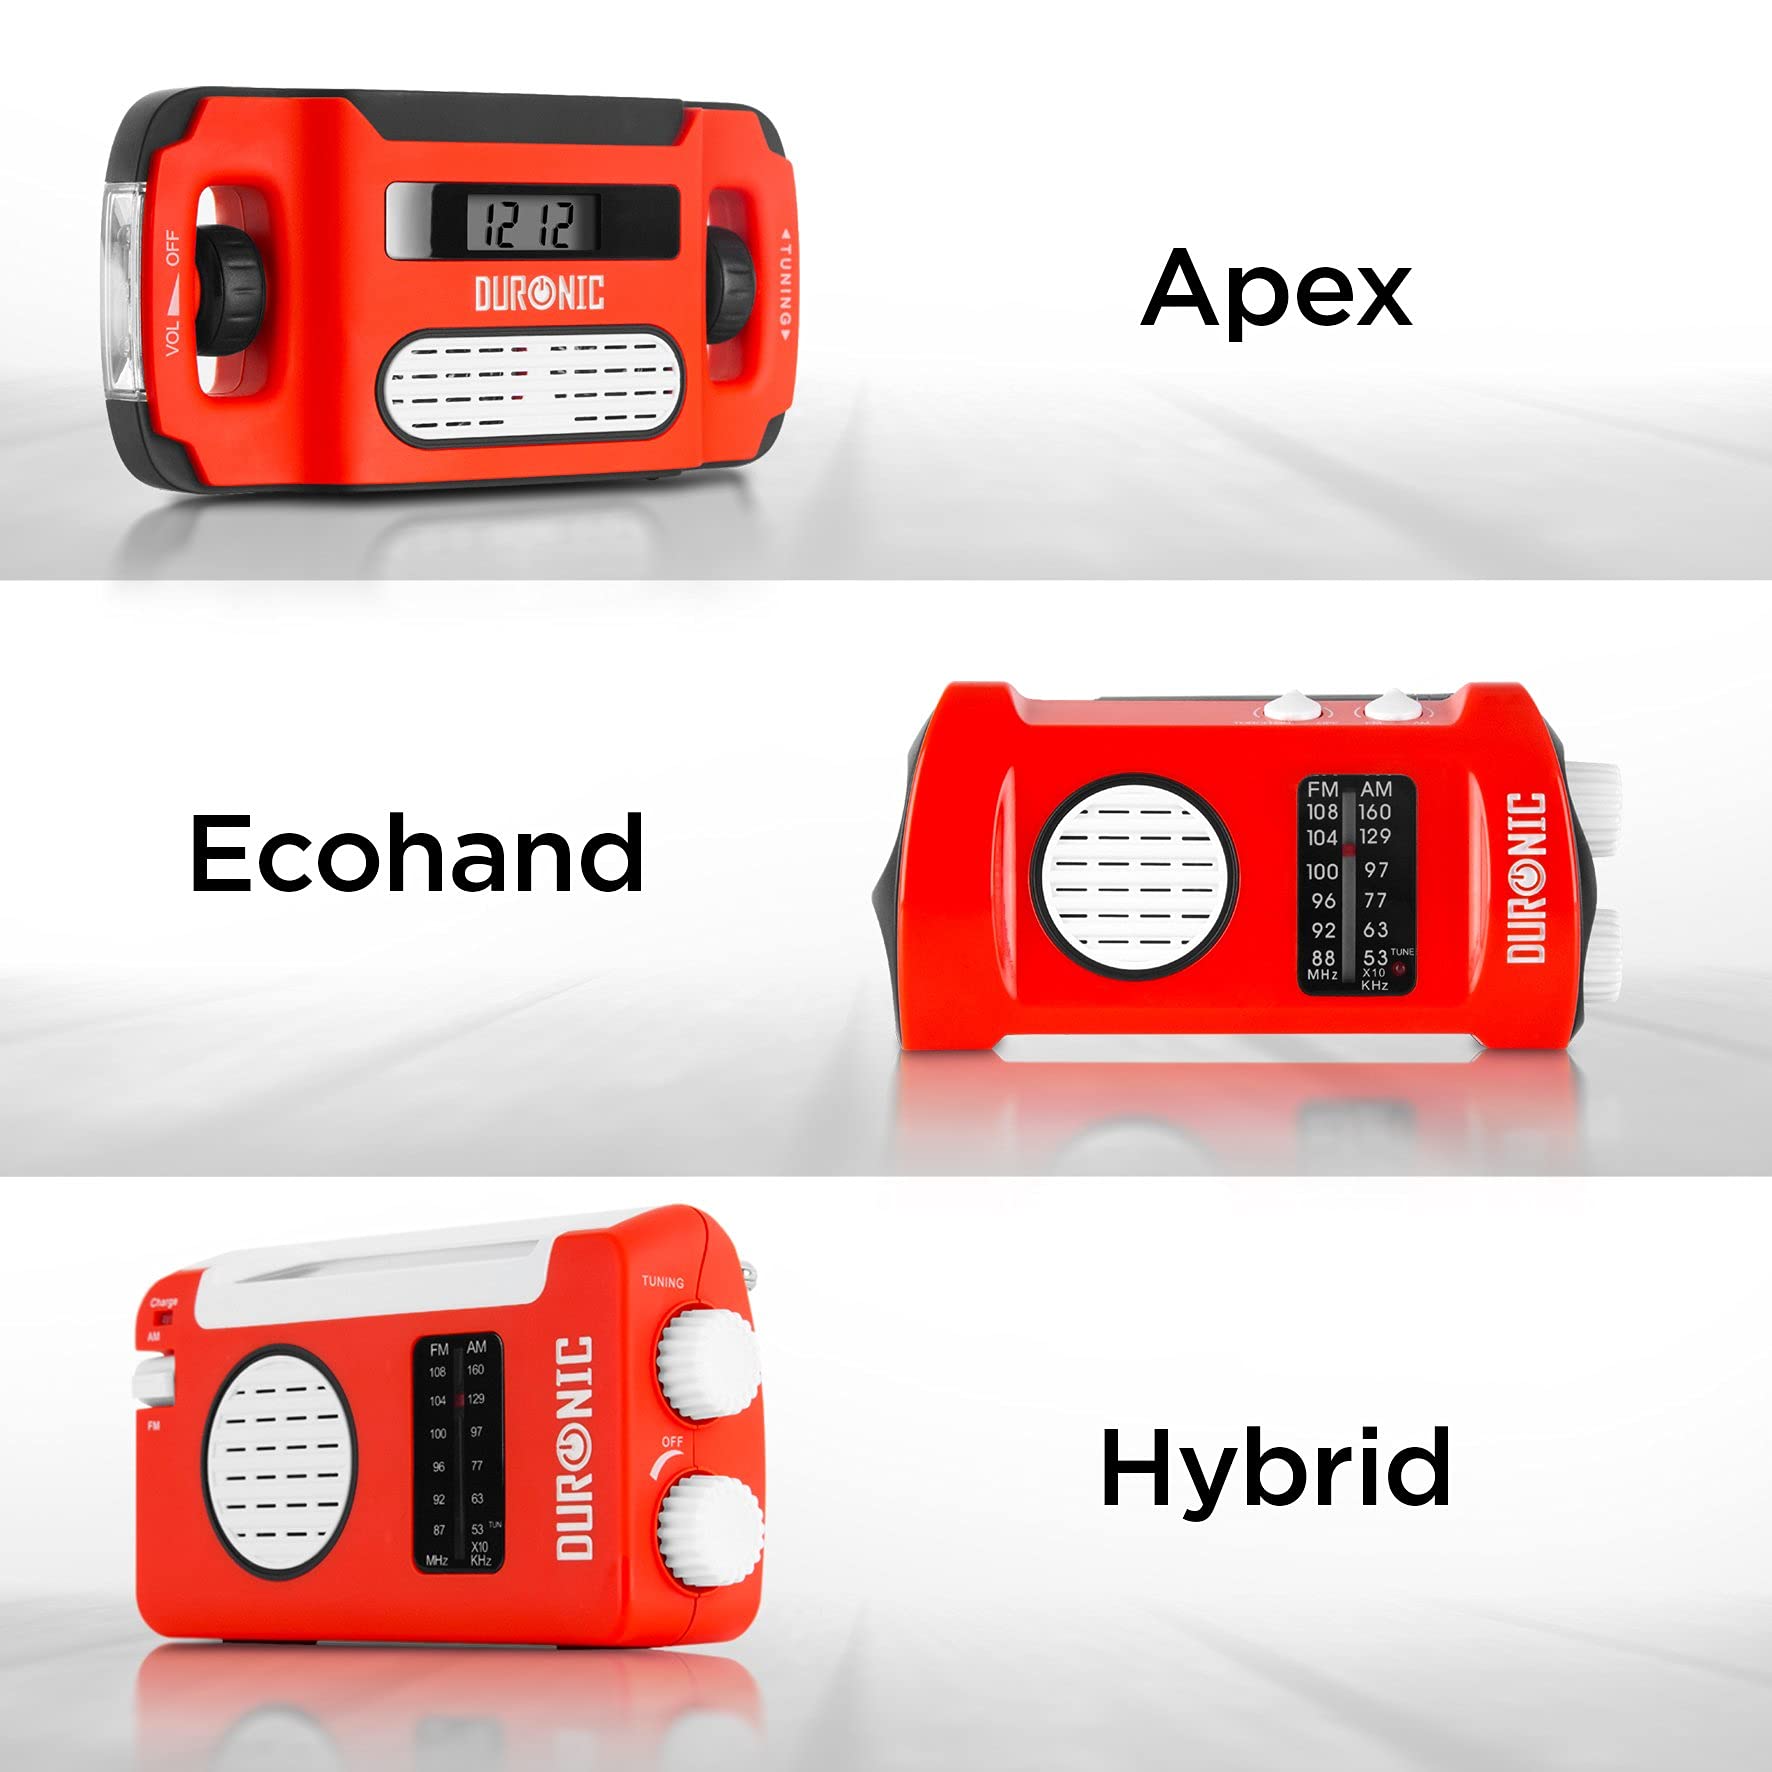 Duronic Wind Up Solar Powered Radio Hybrid, Rechargeable Portable AM FM Radio with Three Charging Methods, Battery Free, Solar Panels, Adjustable Antenna for Camping, Hiking and Emergencies